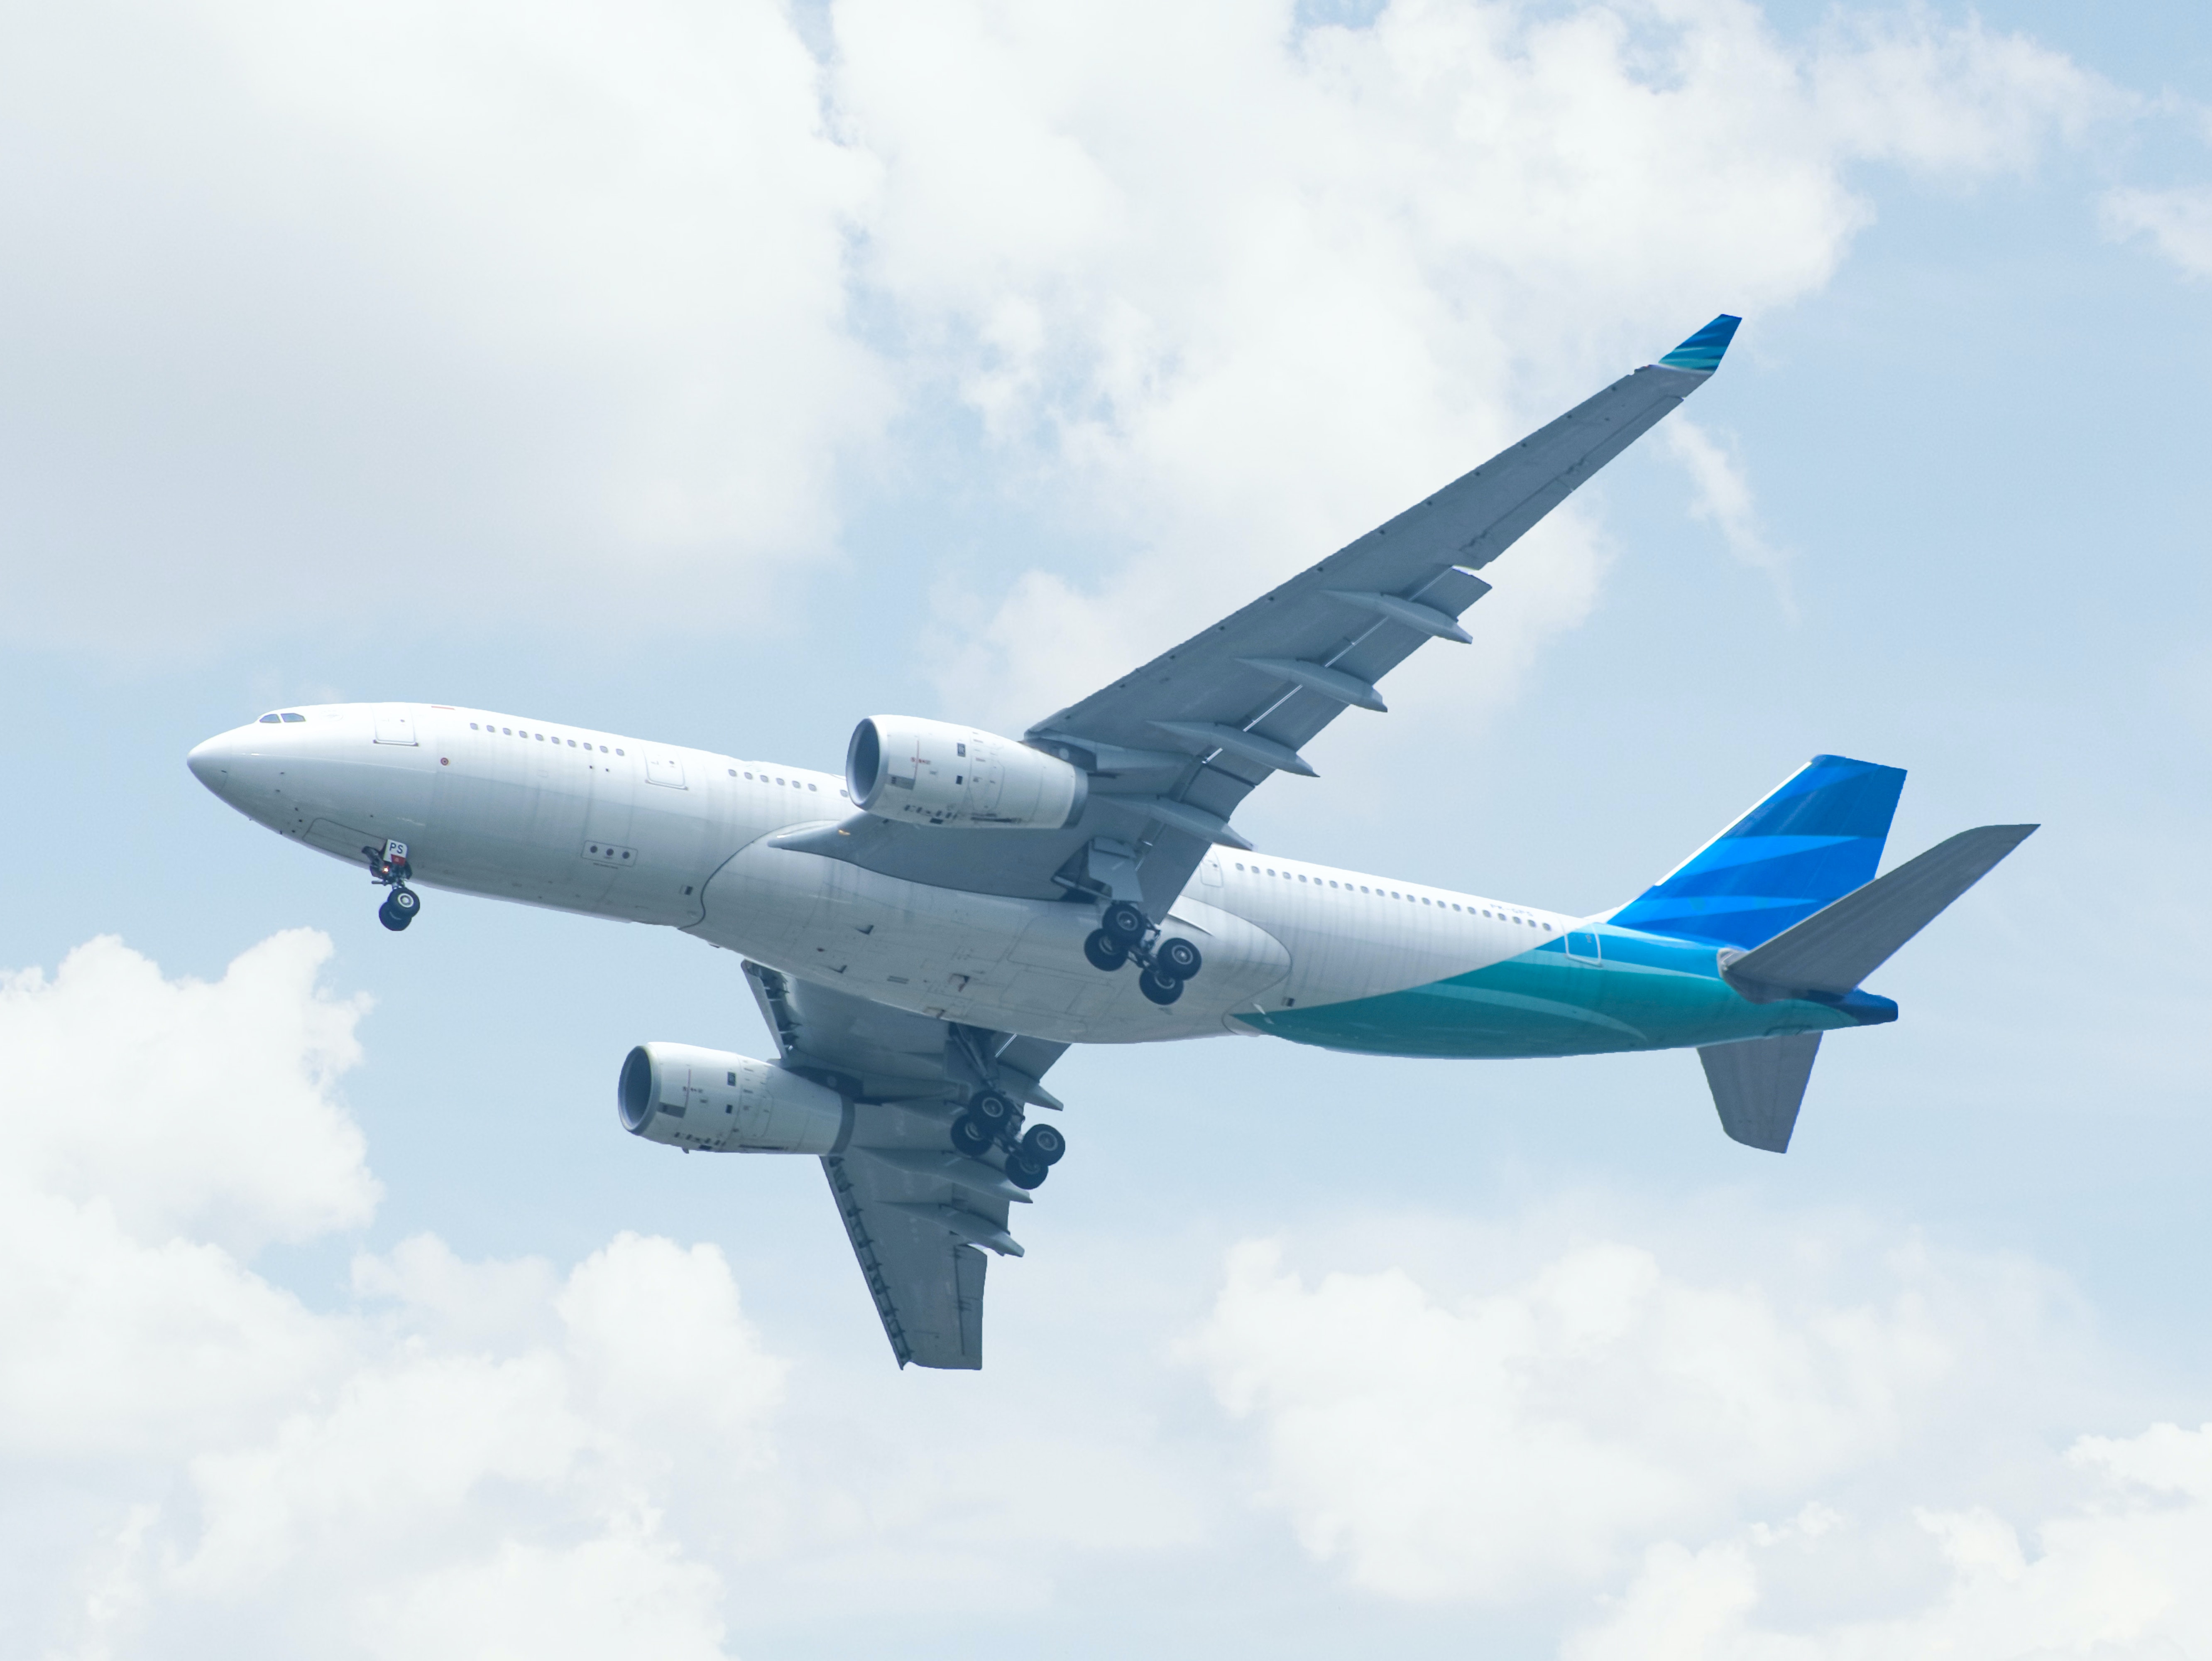 Wonderinterest | Summer season is coming. Airlines are getting ready